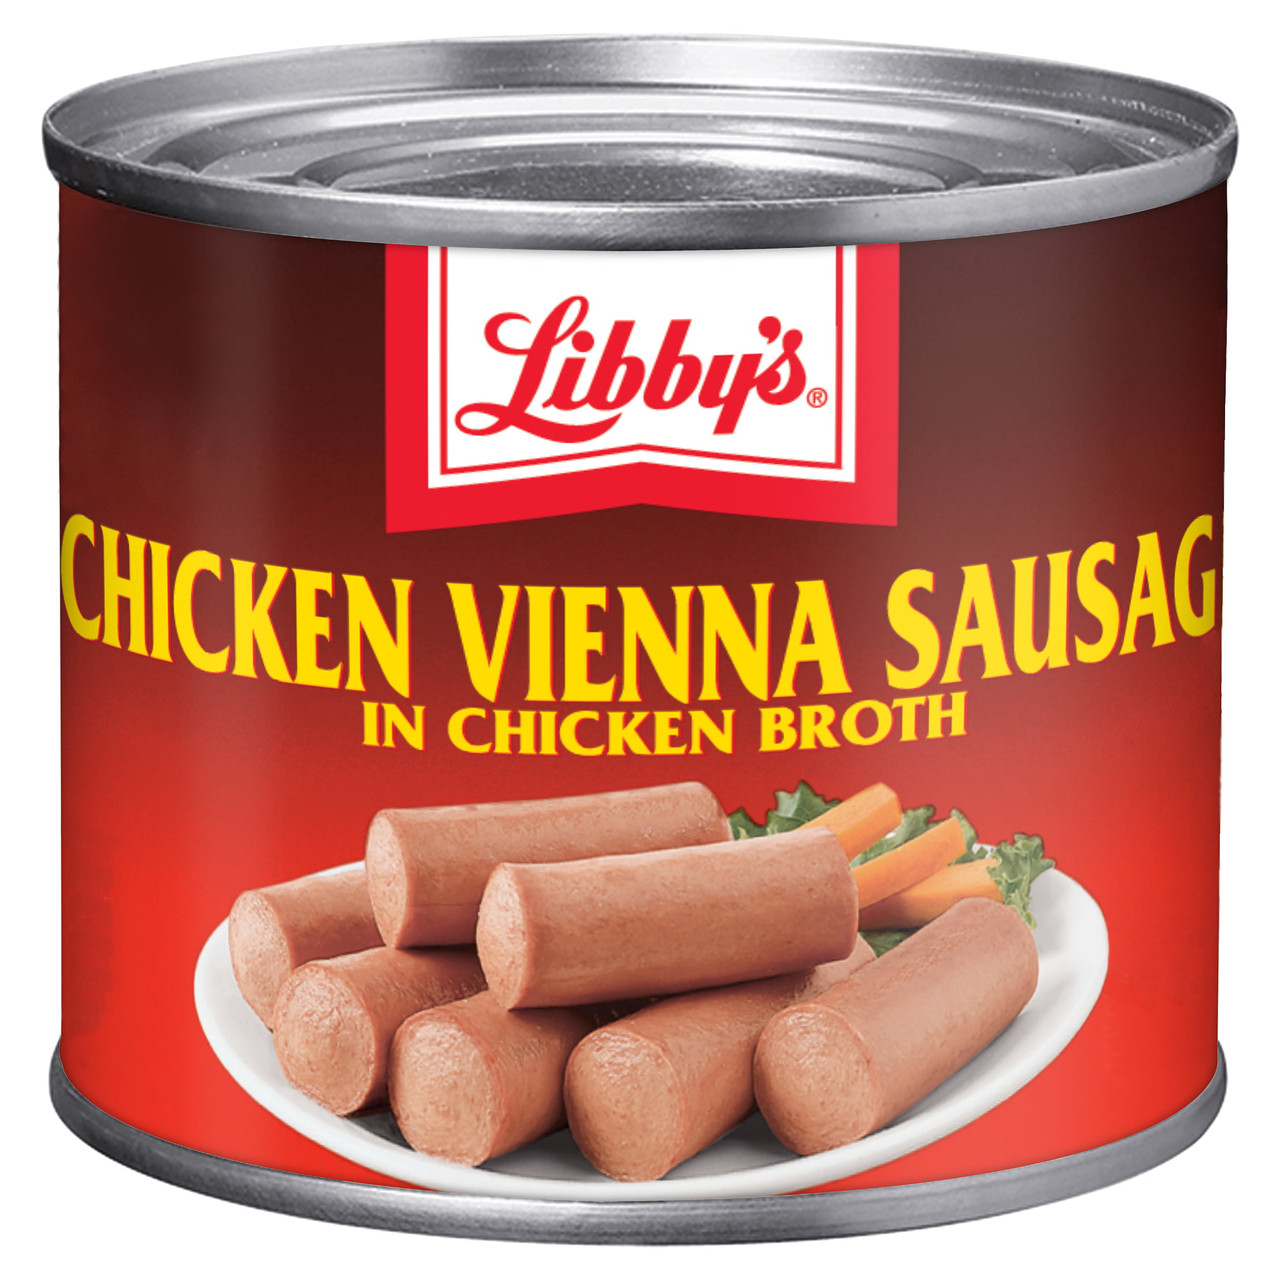 Libby's Chicken Vienna Sausage, 4.6 oz Can - [From 6.00 - Choose pk Qty ] - *Ships from Miami